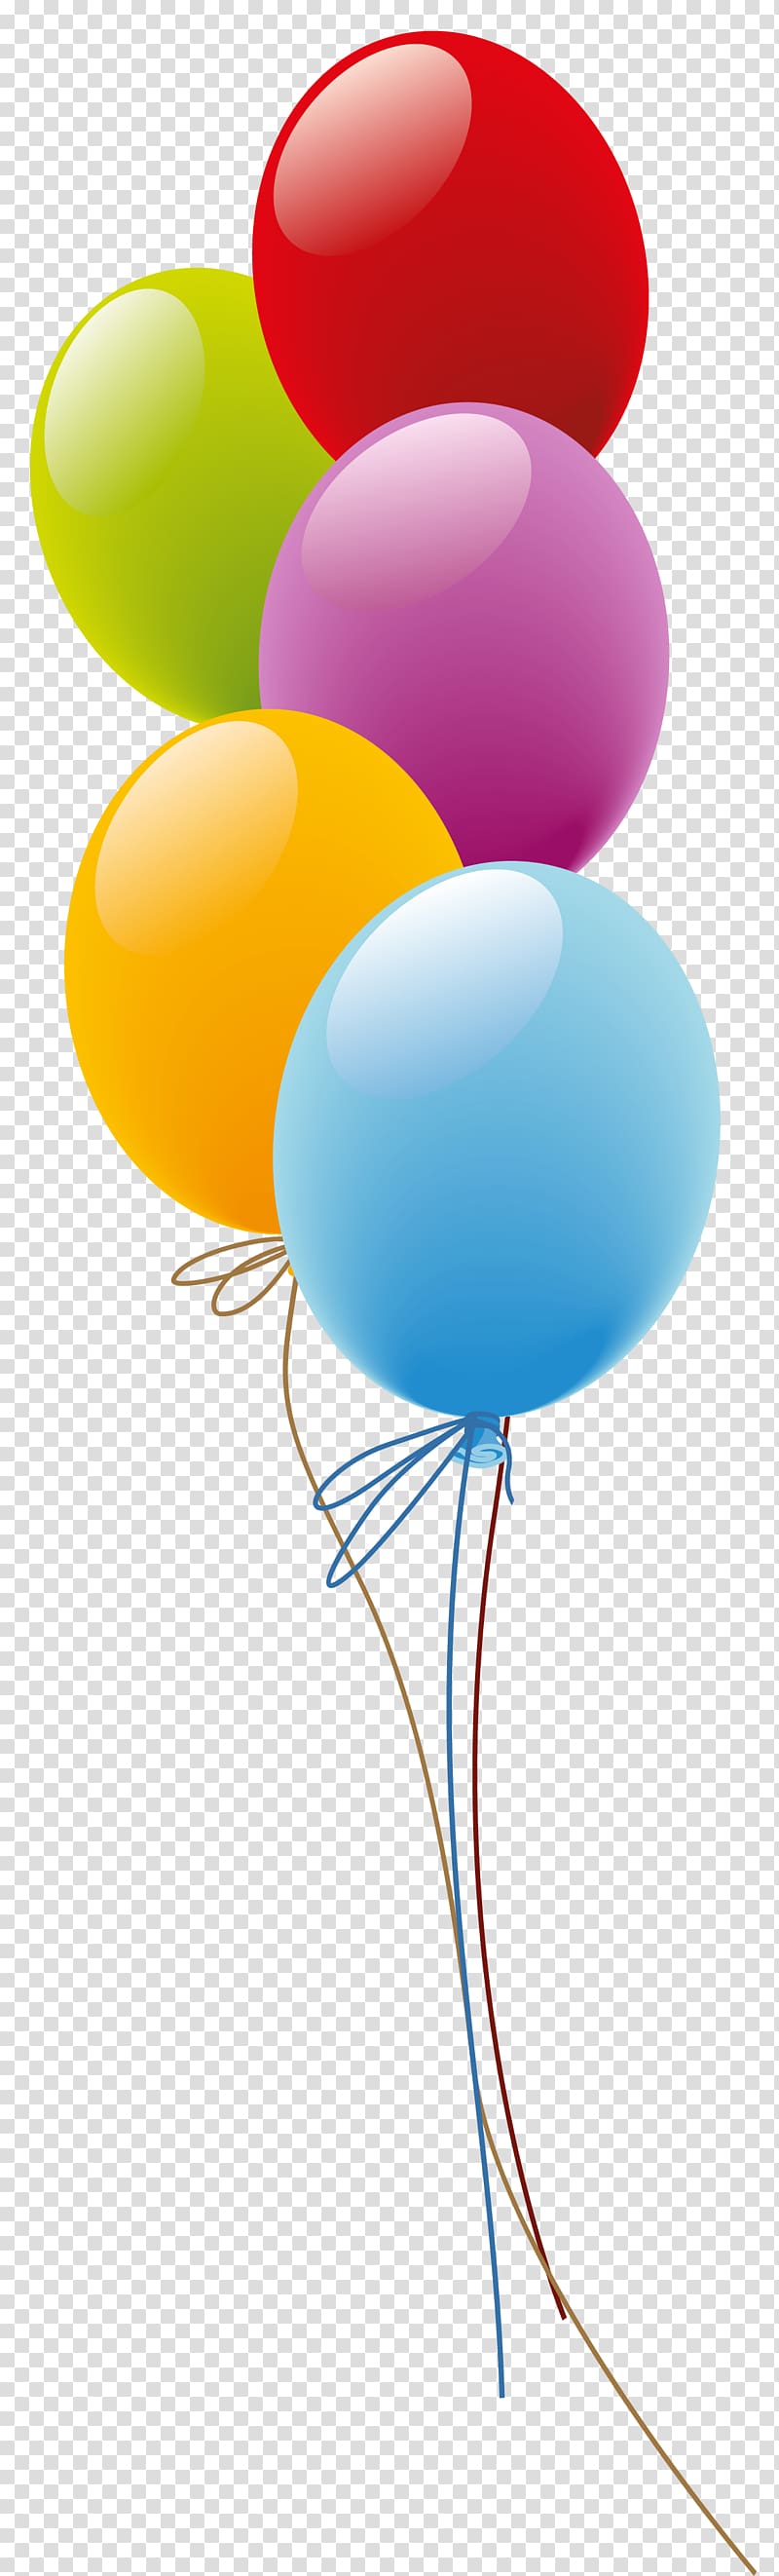 Balloon Birthday Gift Flower delivery , Balloons , blue, orange, purple, red, and green balloomns transparent background PNG clipart